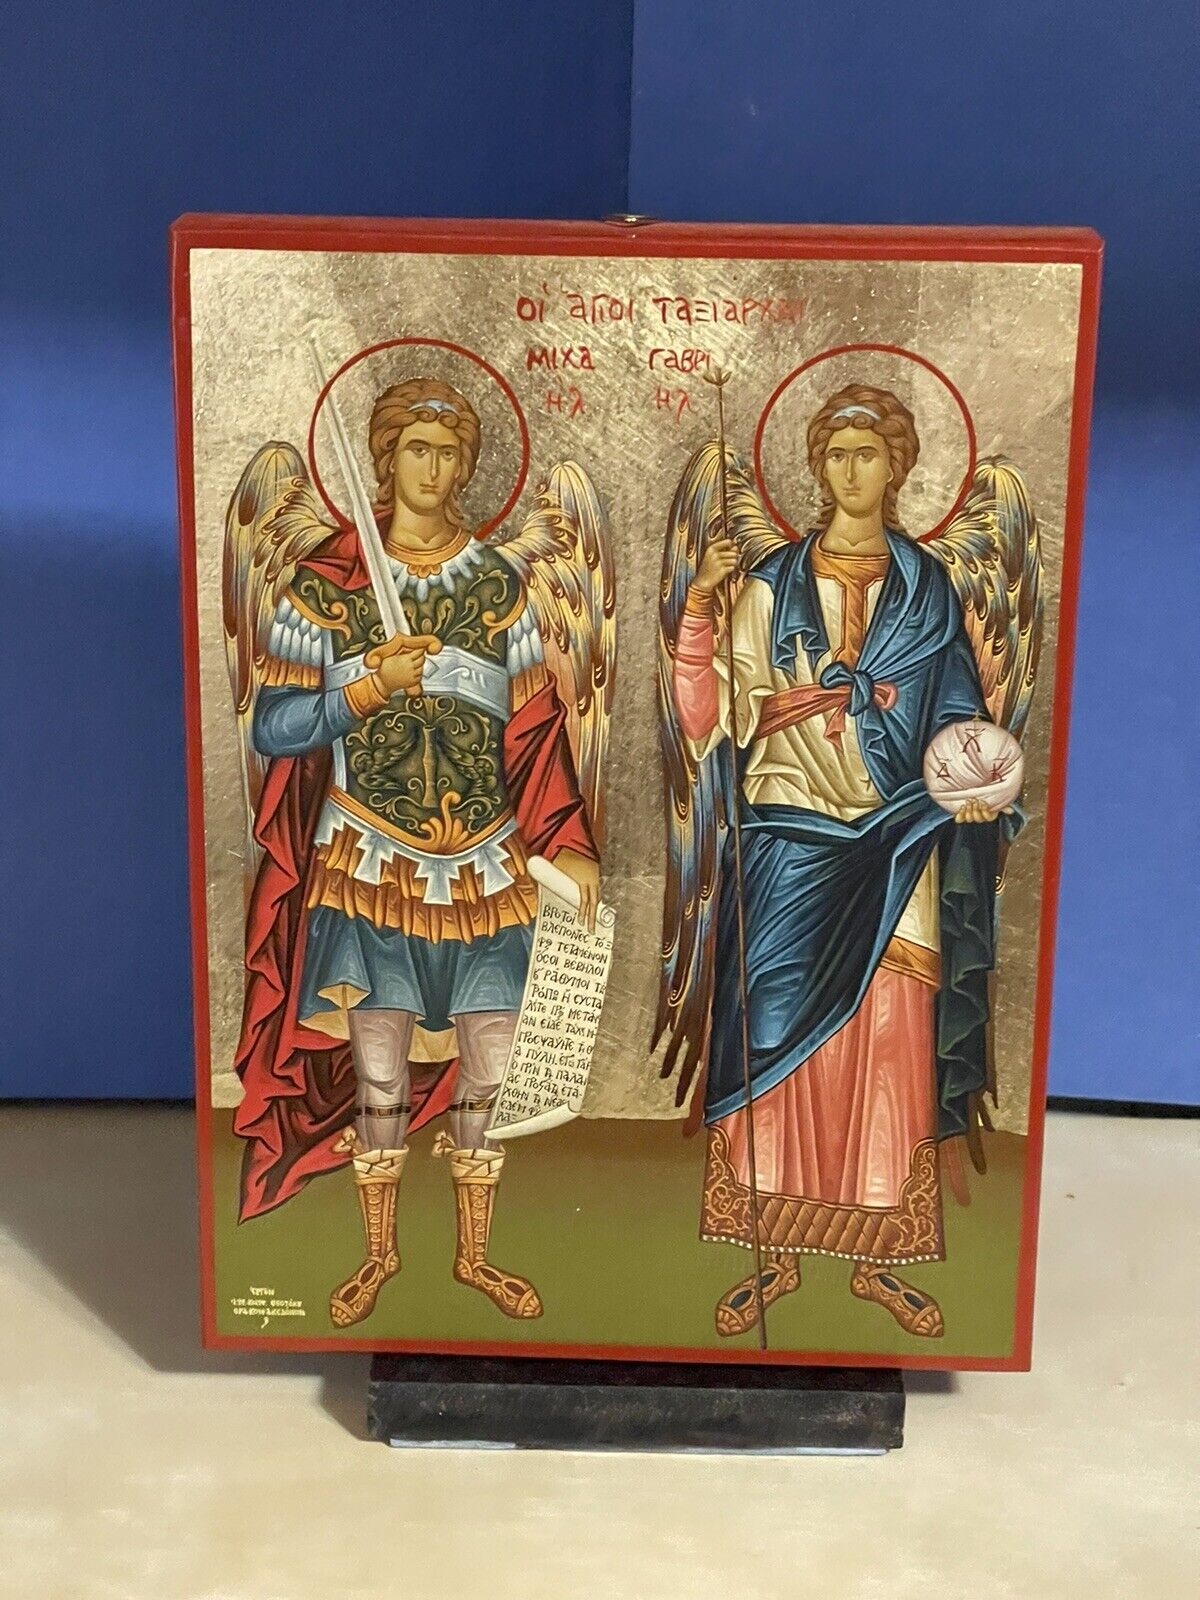 SYNAXIS OF THE ARCHANGELS MICHAEL AND GABRIEL-WOODEN ICON FLAT, WITH GOLD LEAF